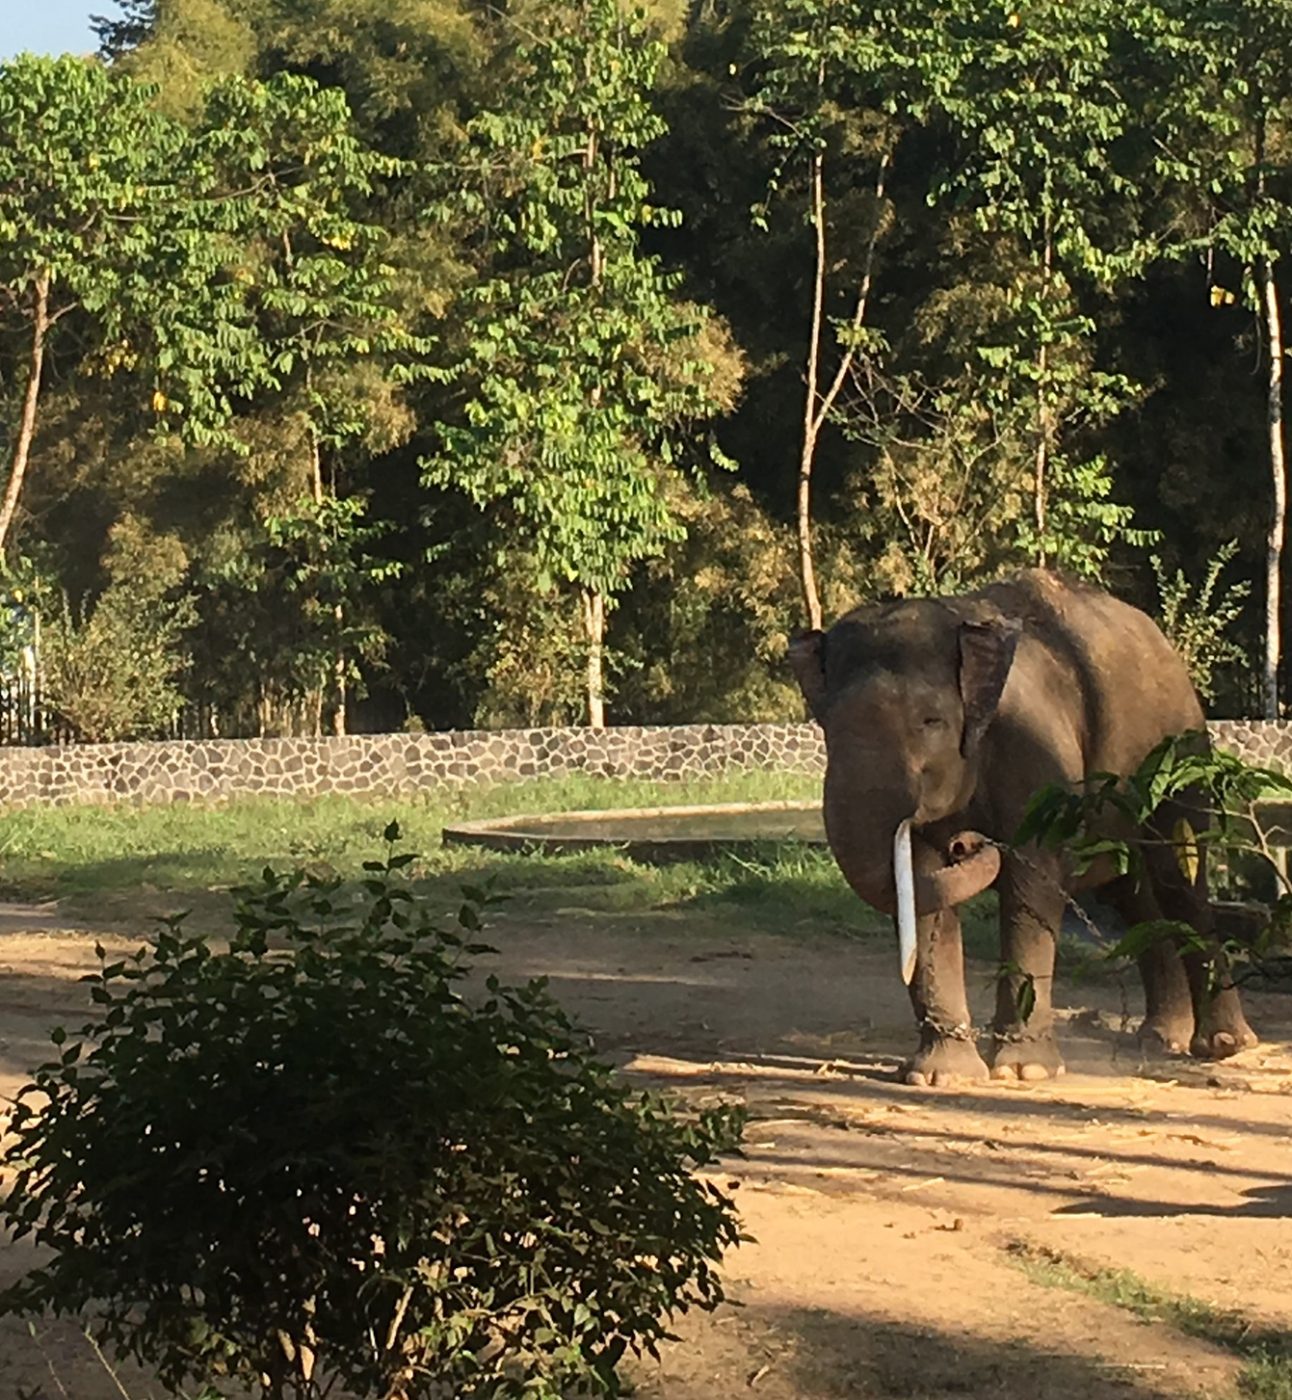 An elephant stands swinging his trunk